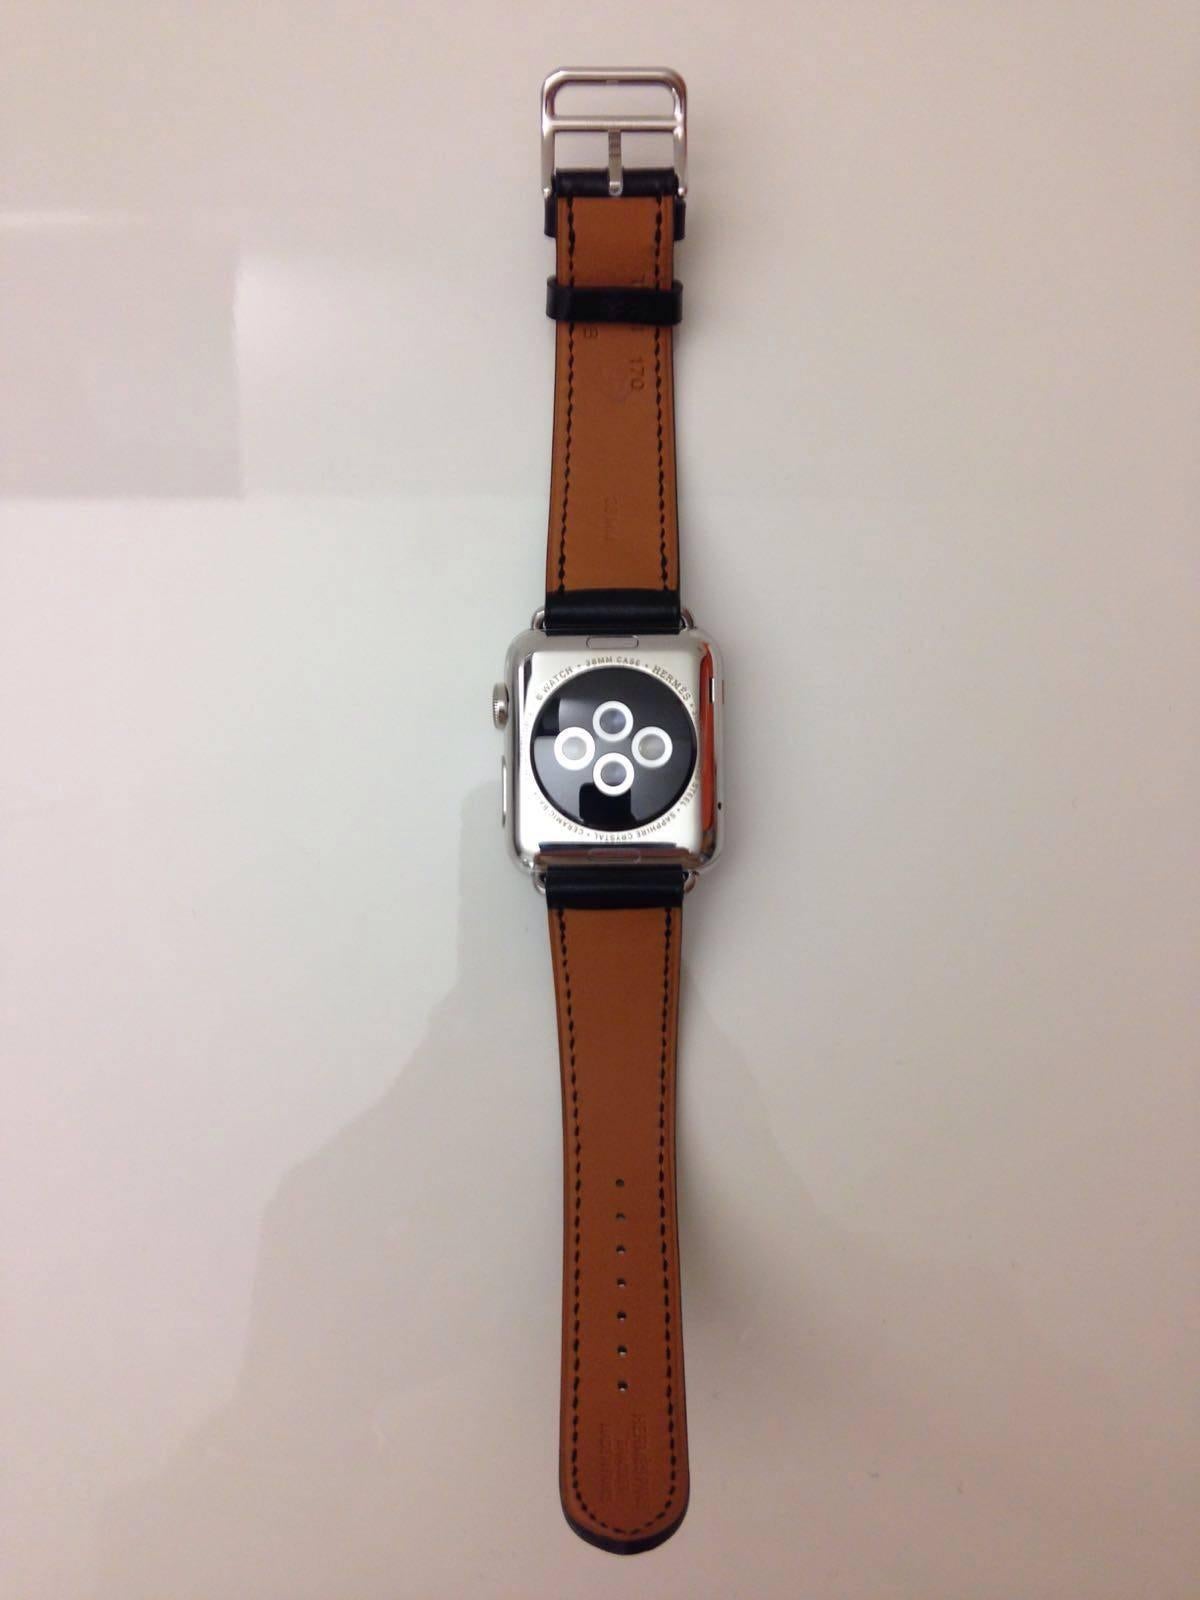 Apple&Hermes watch Single Tour, 38mm Stainless Steel Case with NOIR Leather Band In New Condition For Sale In London, GB